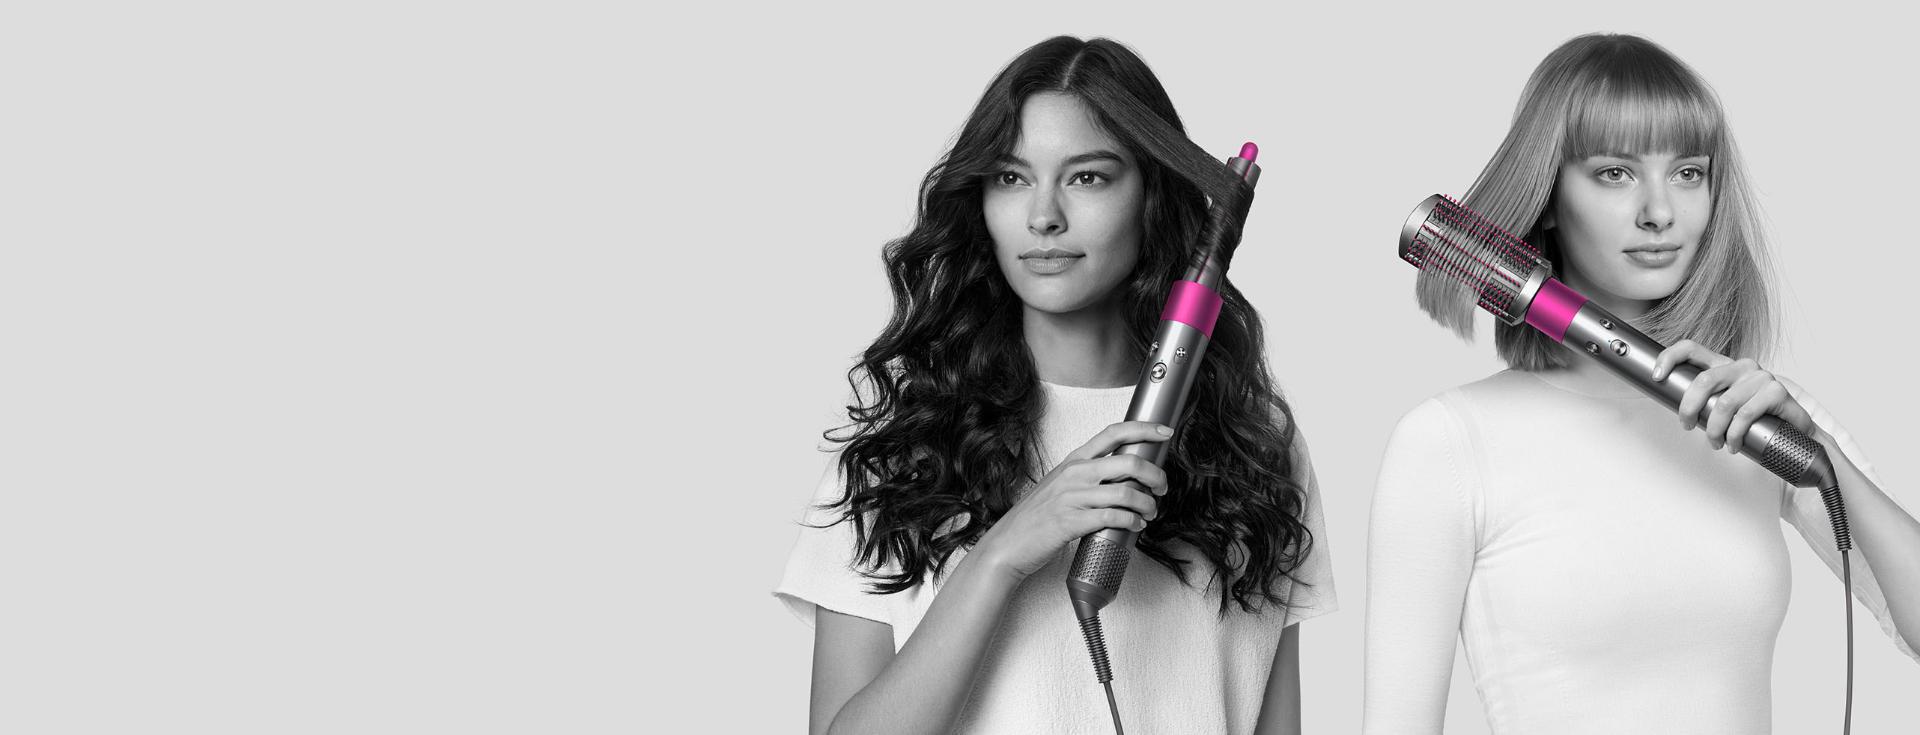 Dyson Airwrap styler curling and smoothing hair.